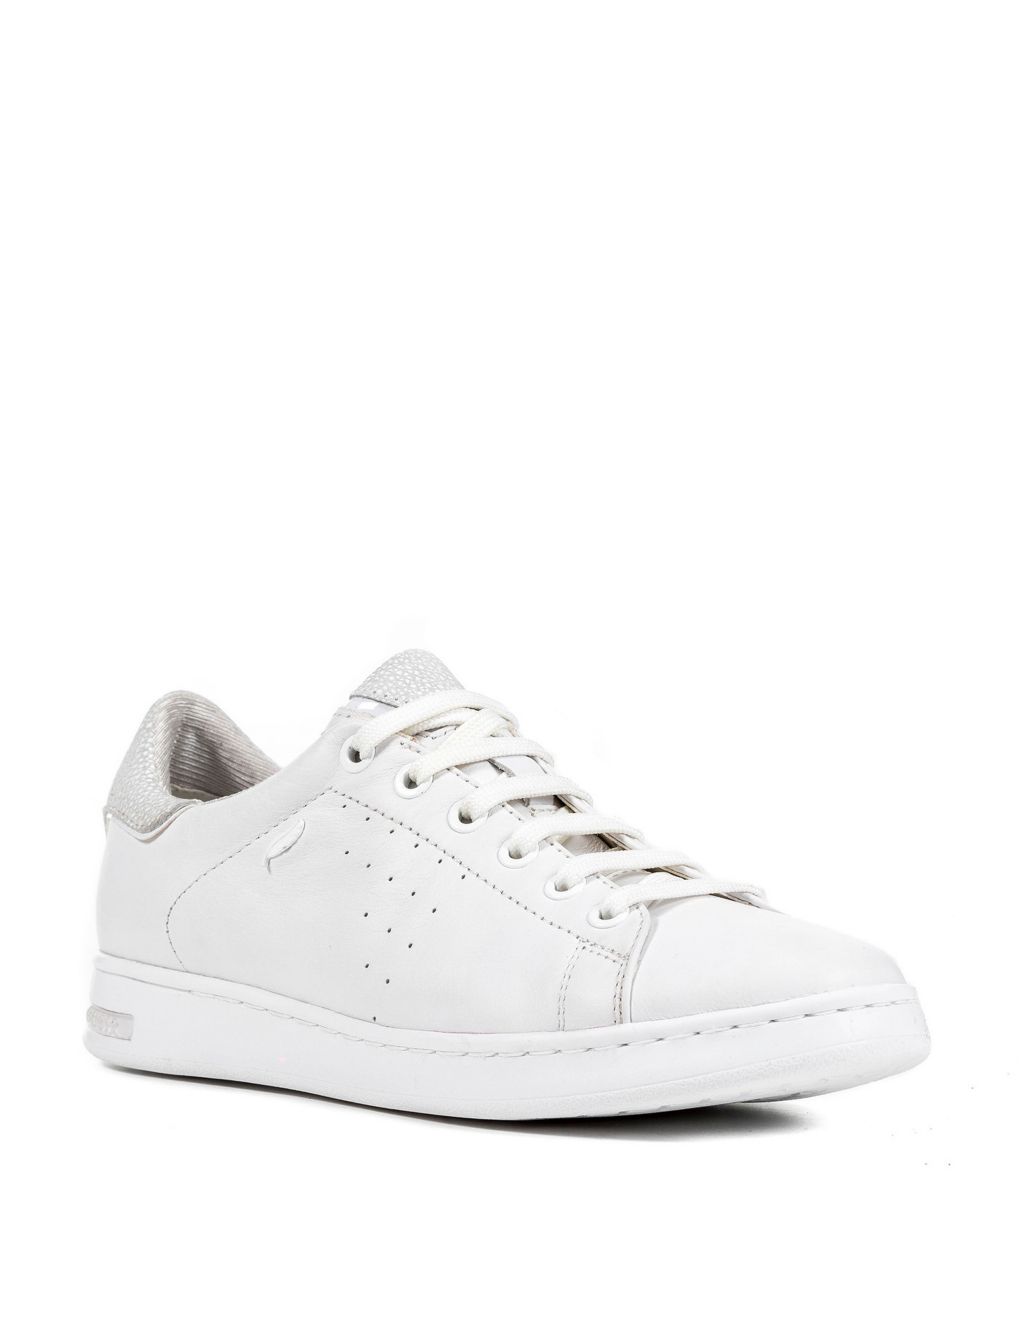 Leather Lace-Up Trainers image 2